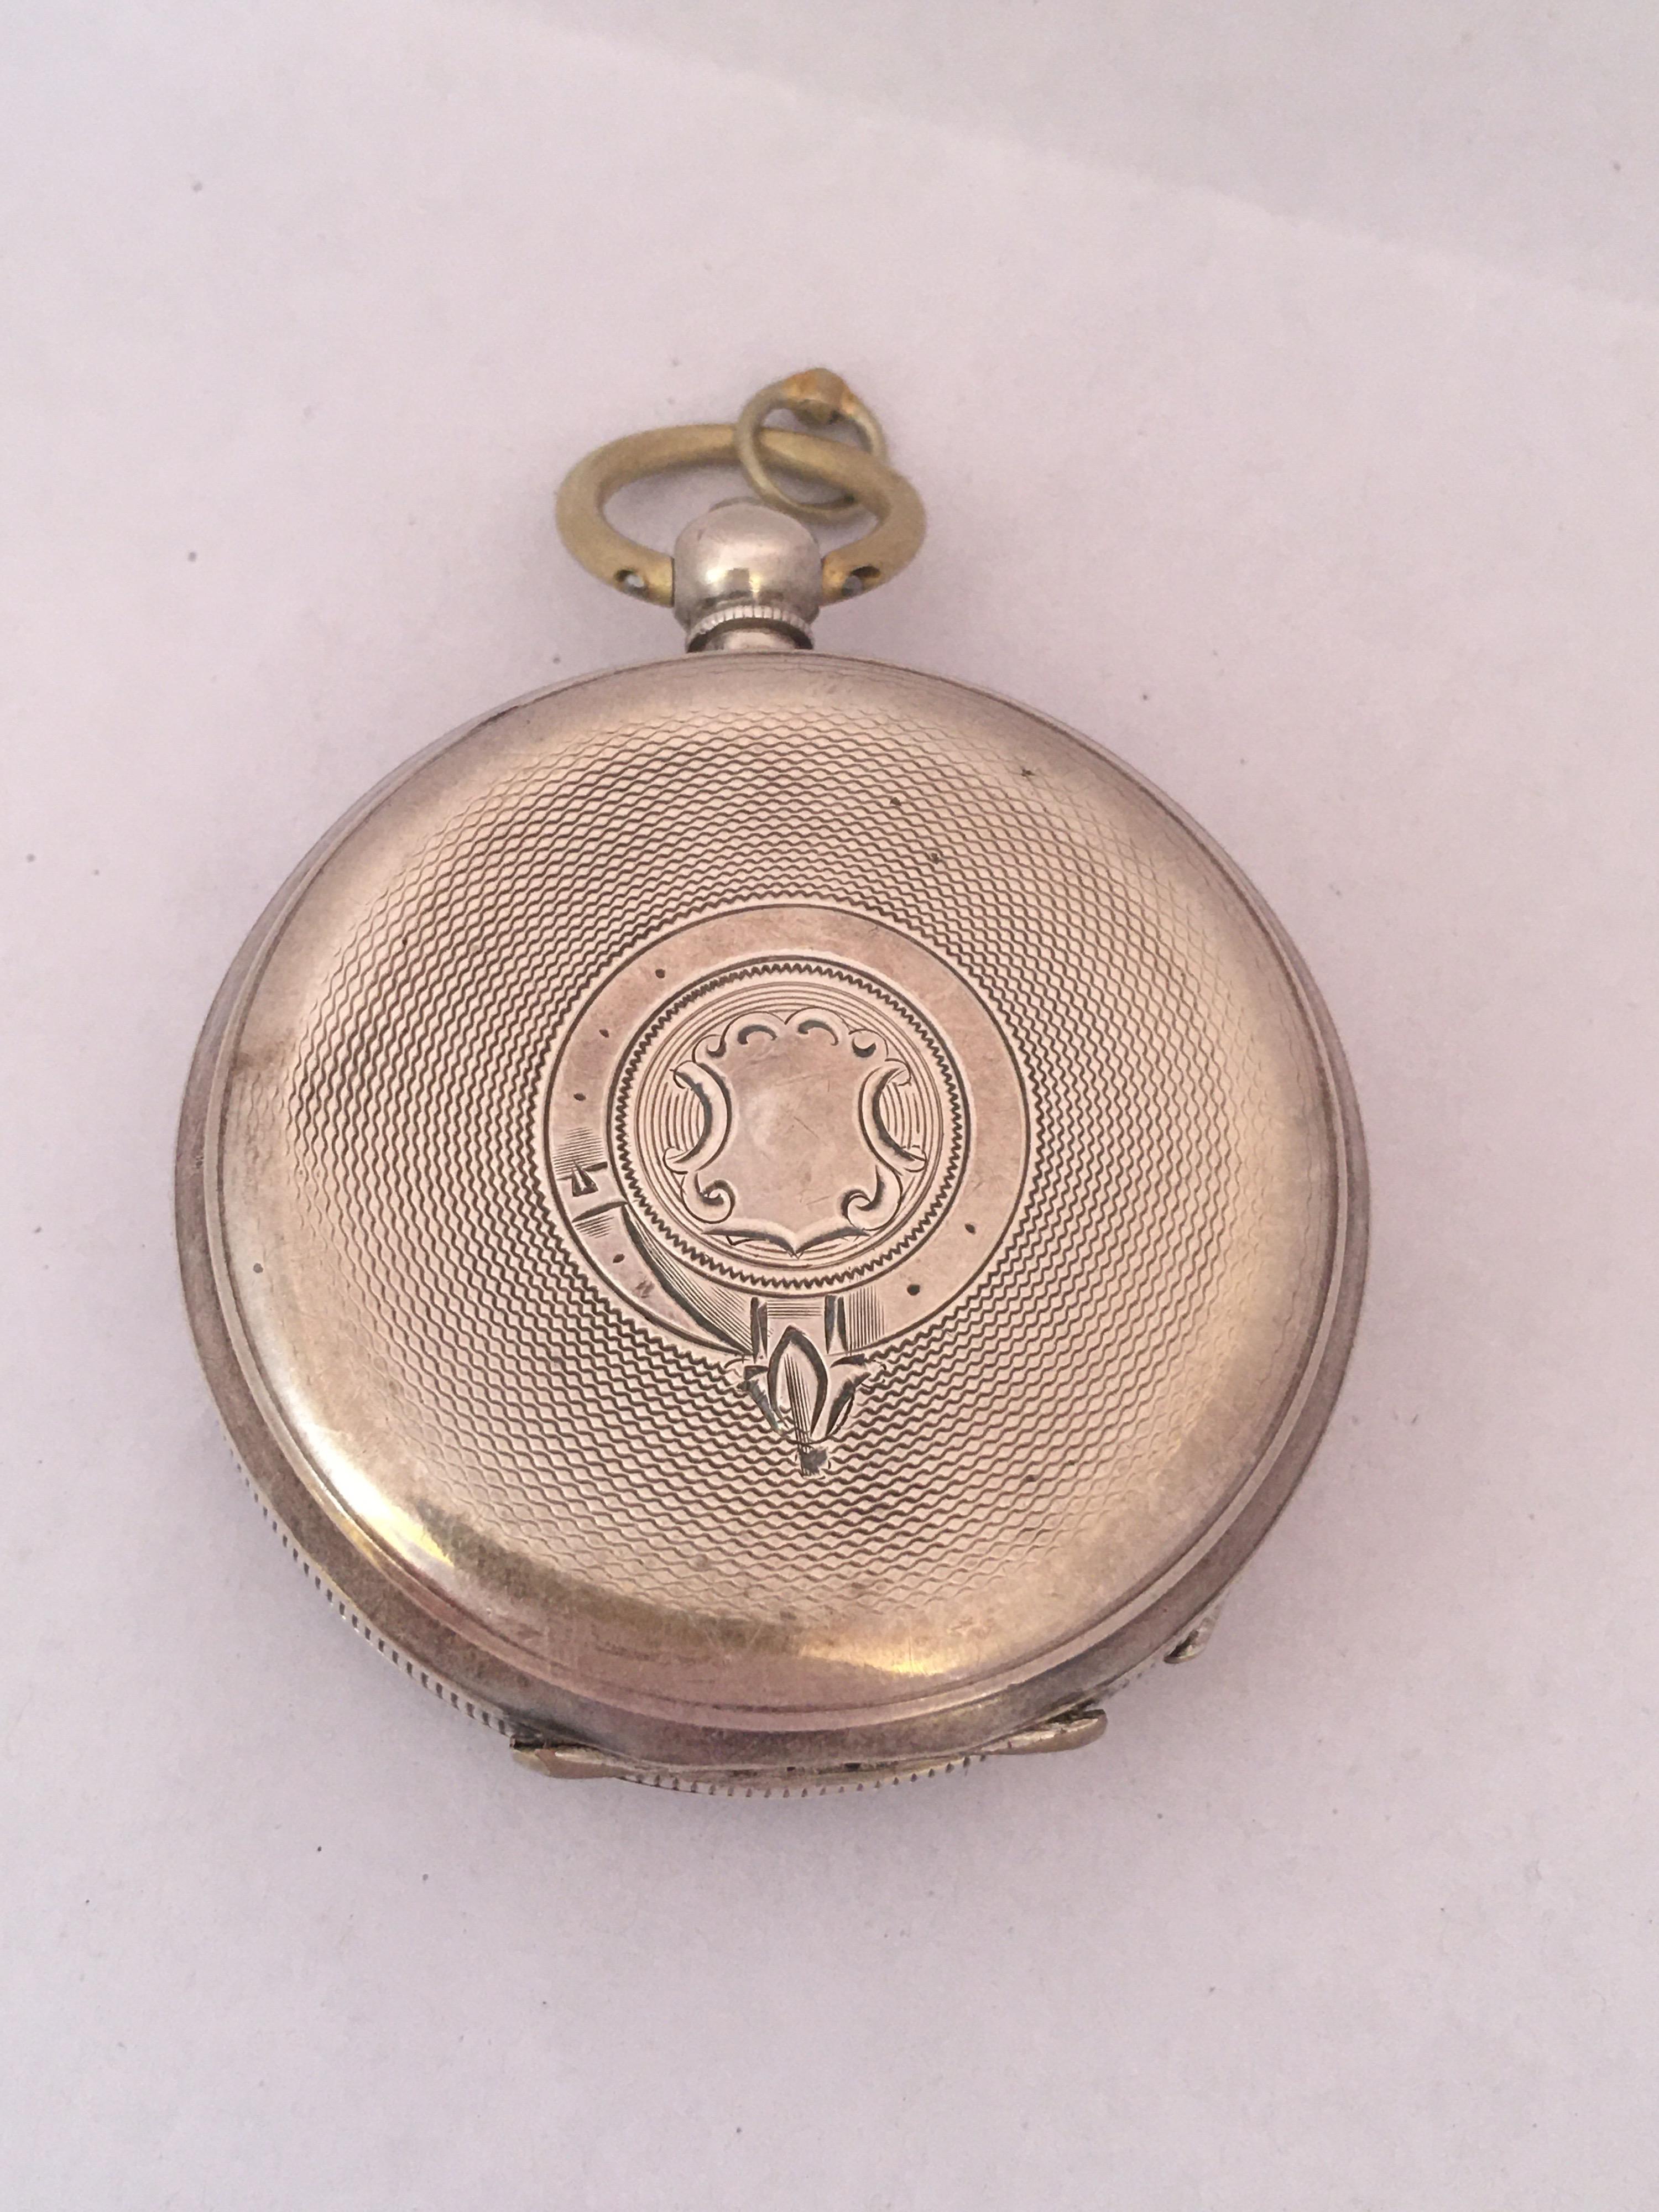 Antique Silver Key-Winding Pocket Watch Signed Acme Lever H. Samuel Manchester 11